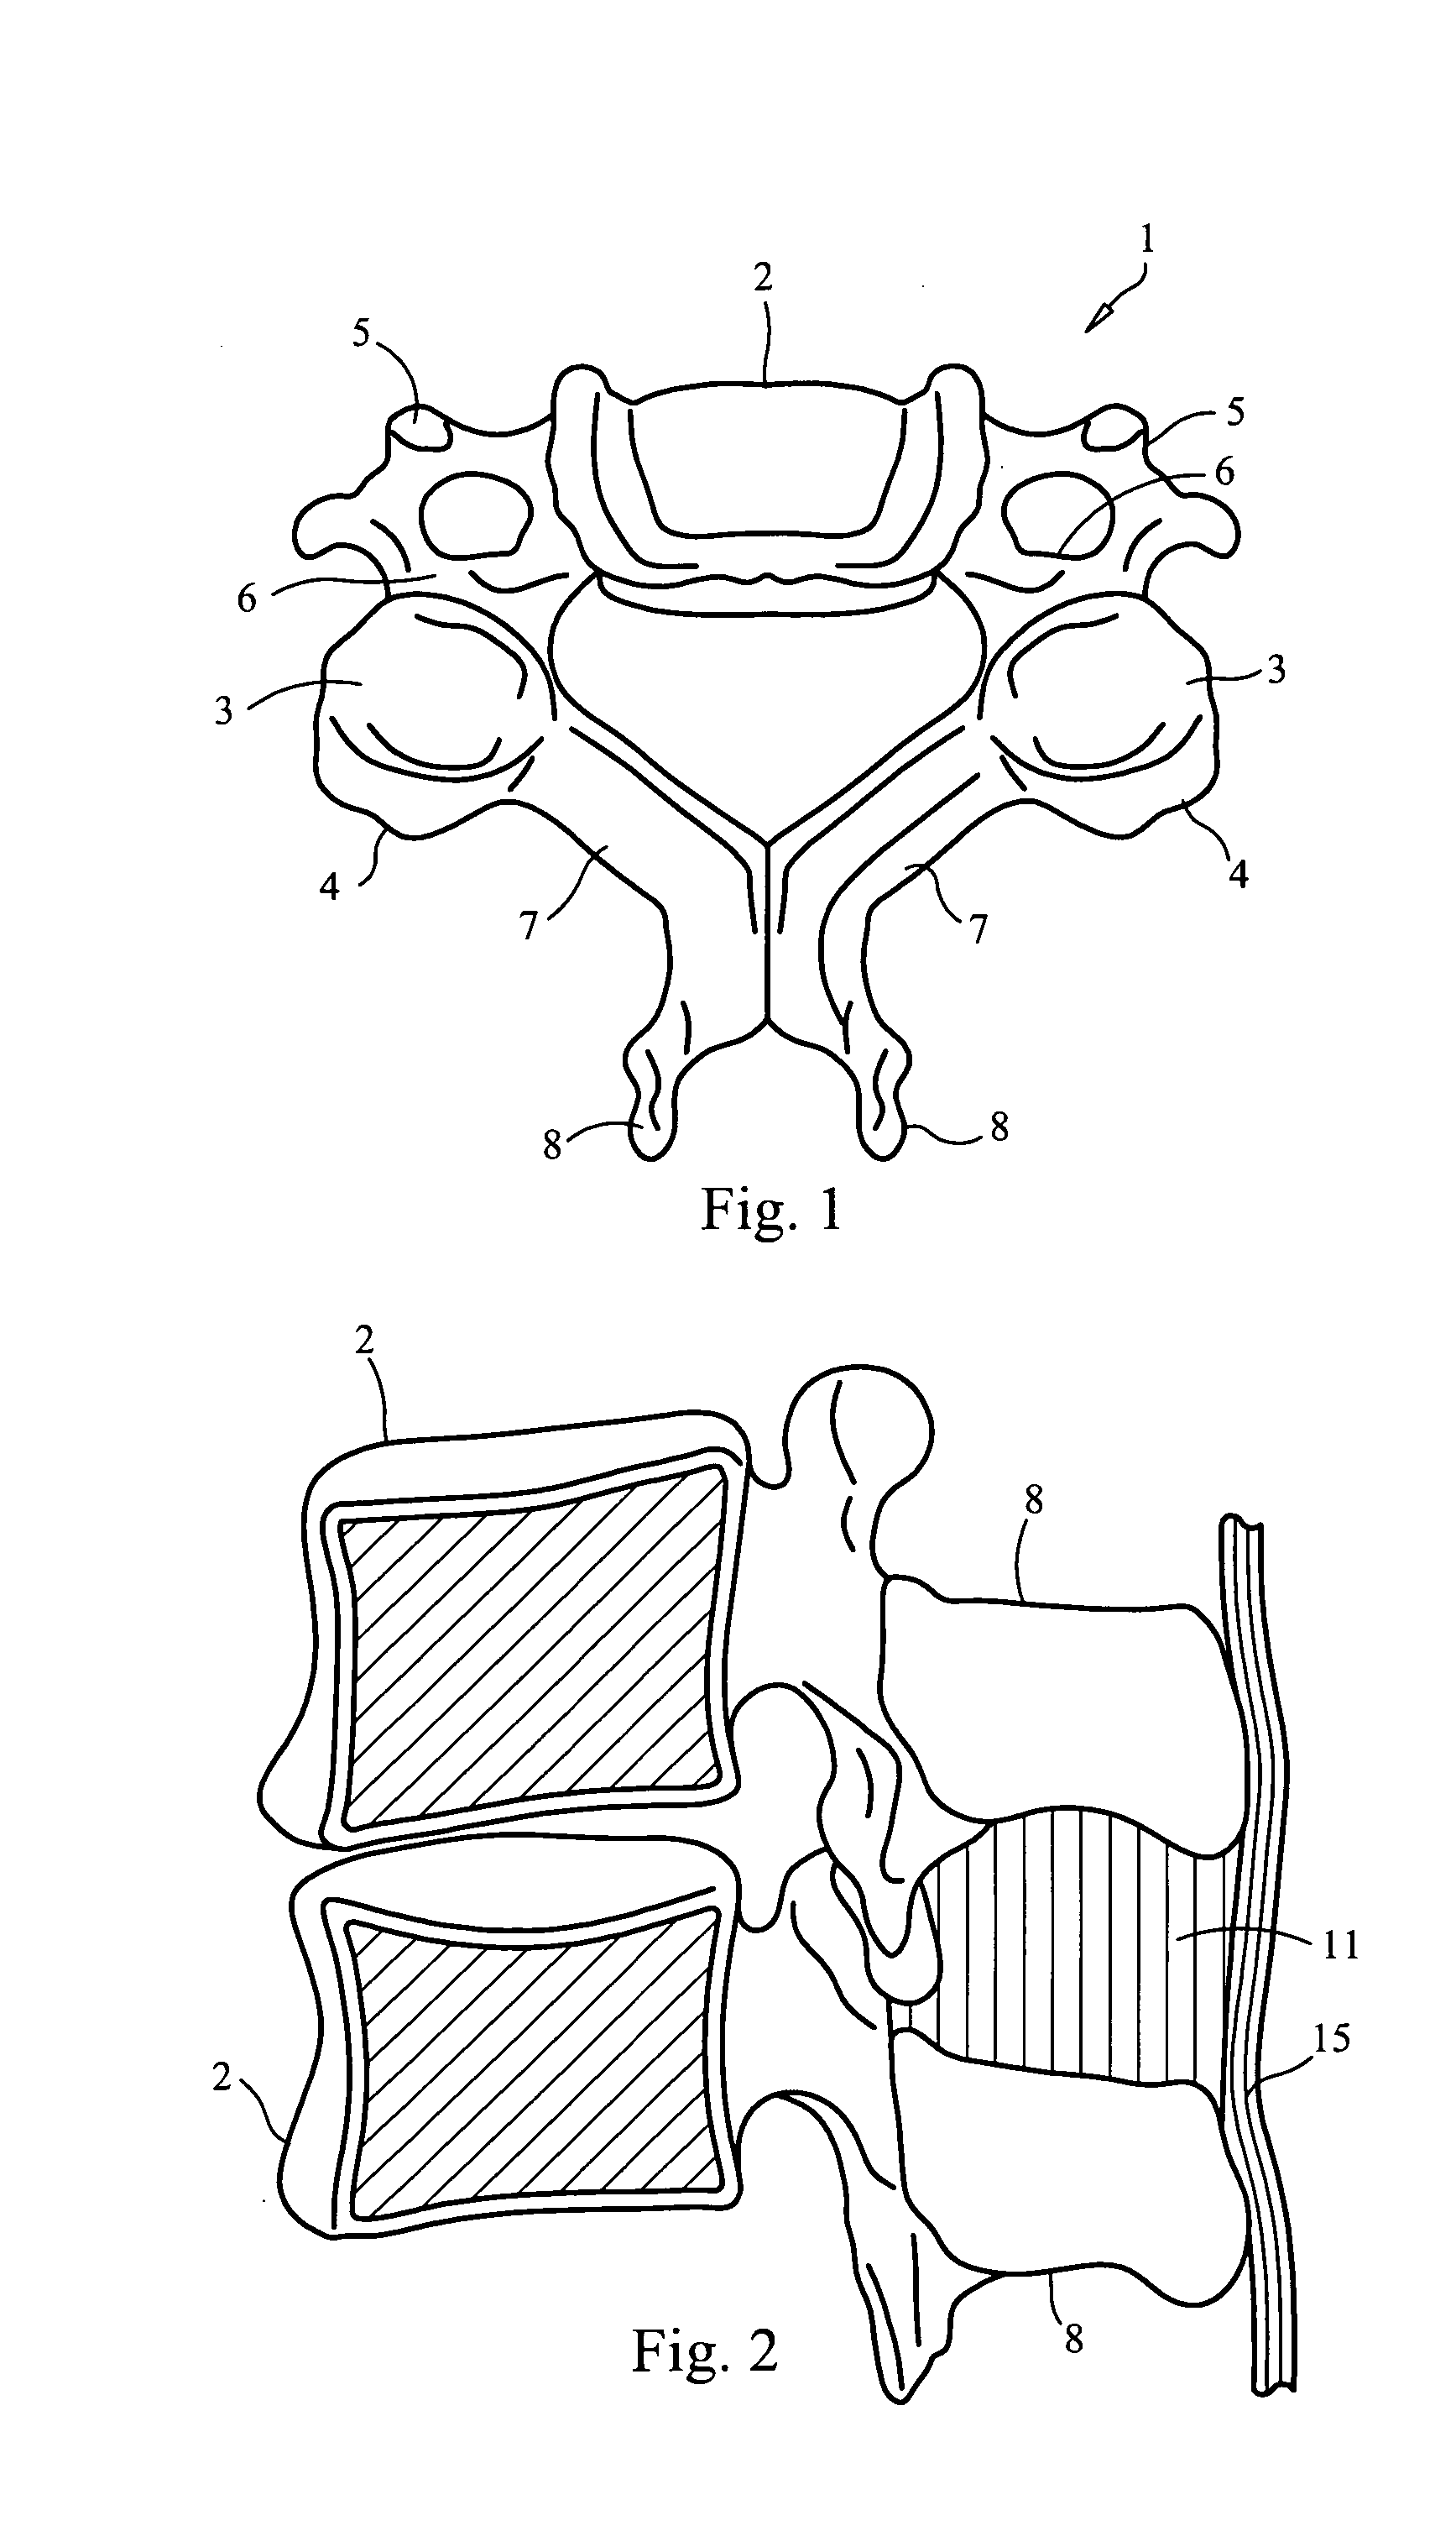 Interspinous implant, tools and methods of implanting